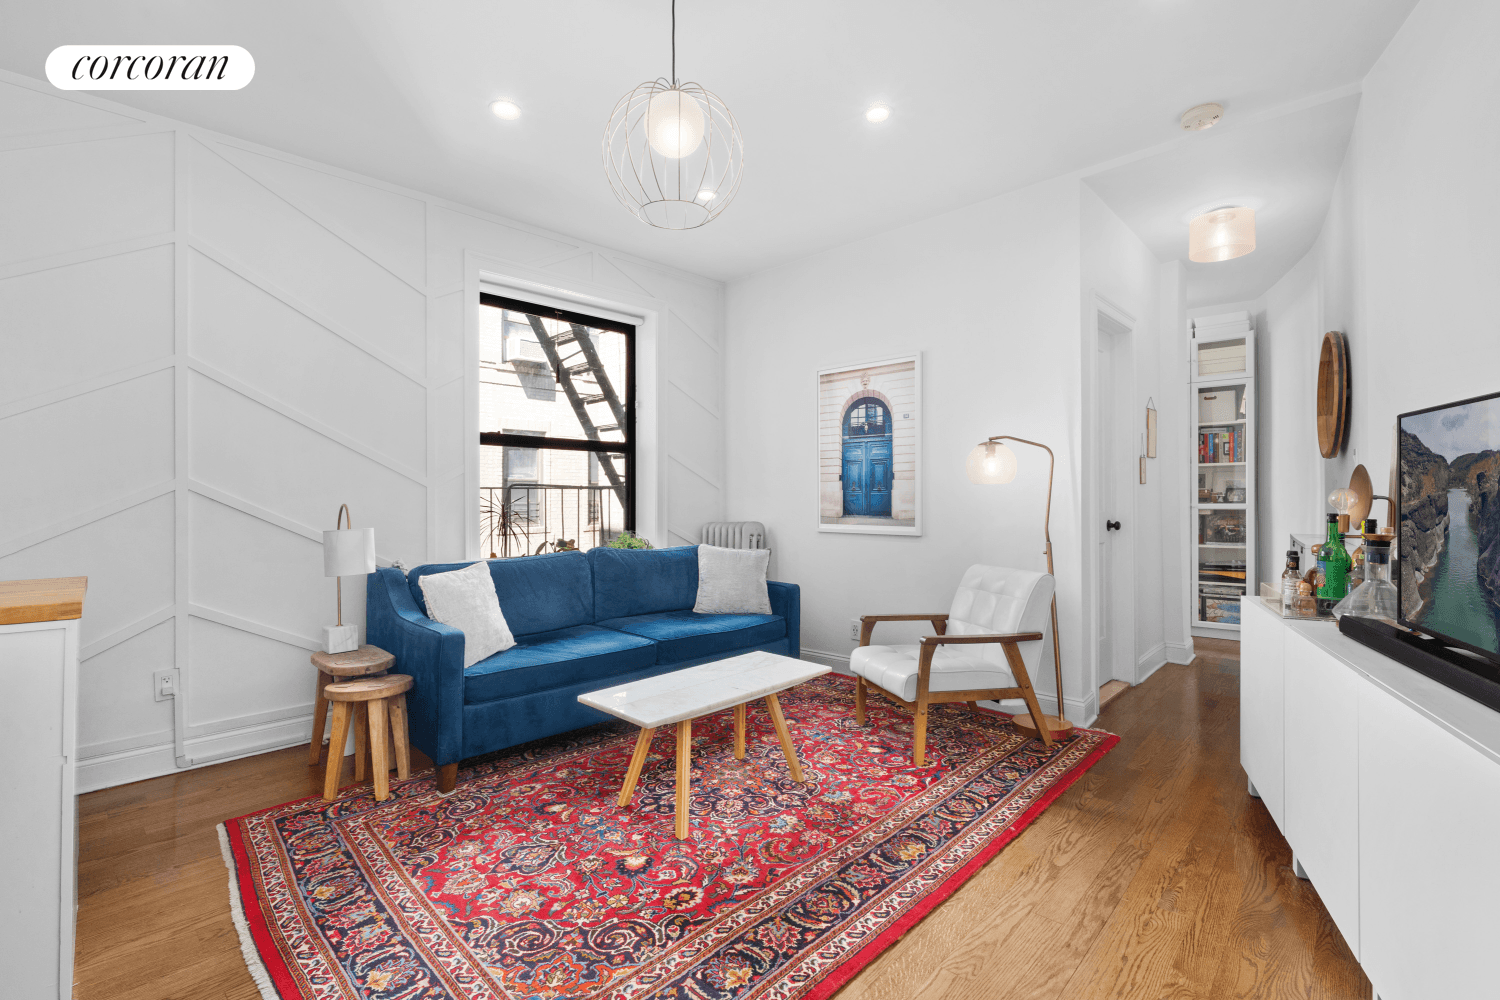 Welcome to 175 Eastern Parkway 5N, a recently updated one bedroom, one bathroom co op located in prime Prospect Heights directly across the street from the Brooklyn Museum, and only ...